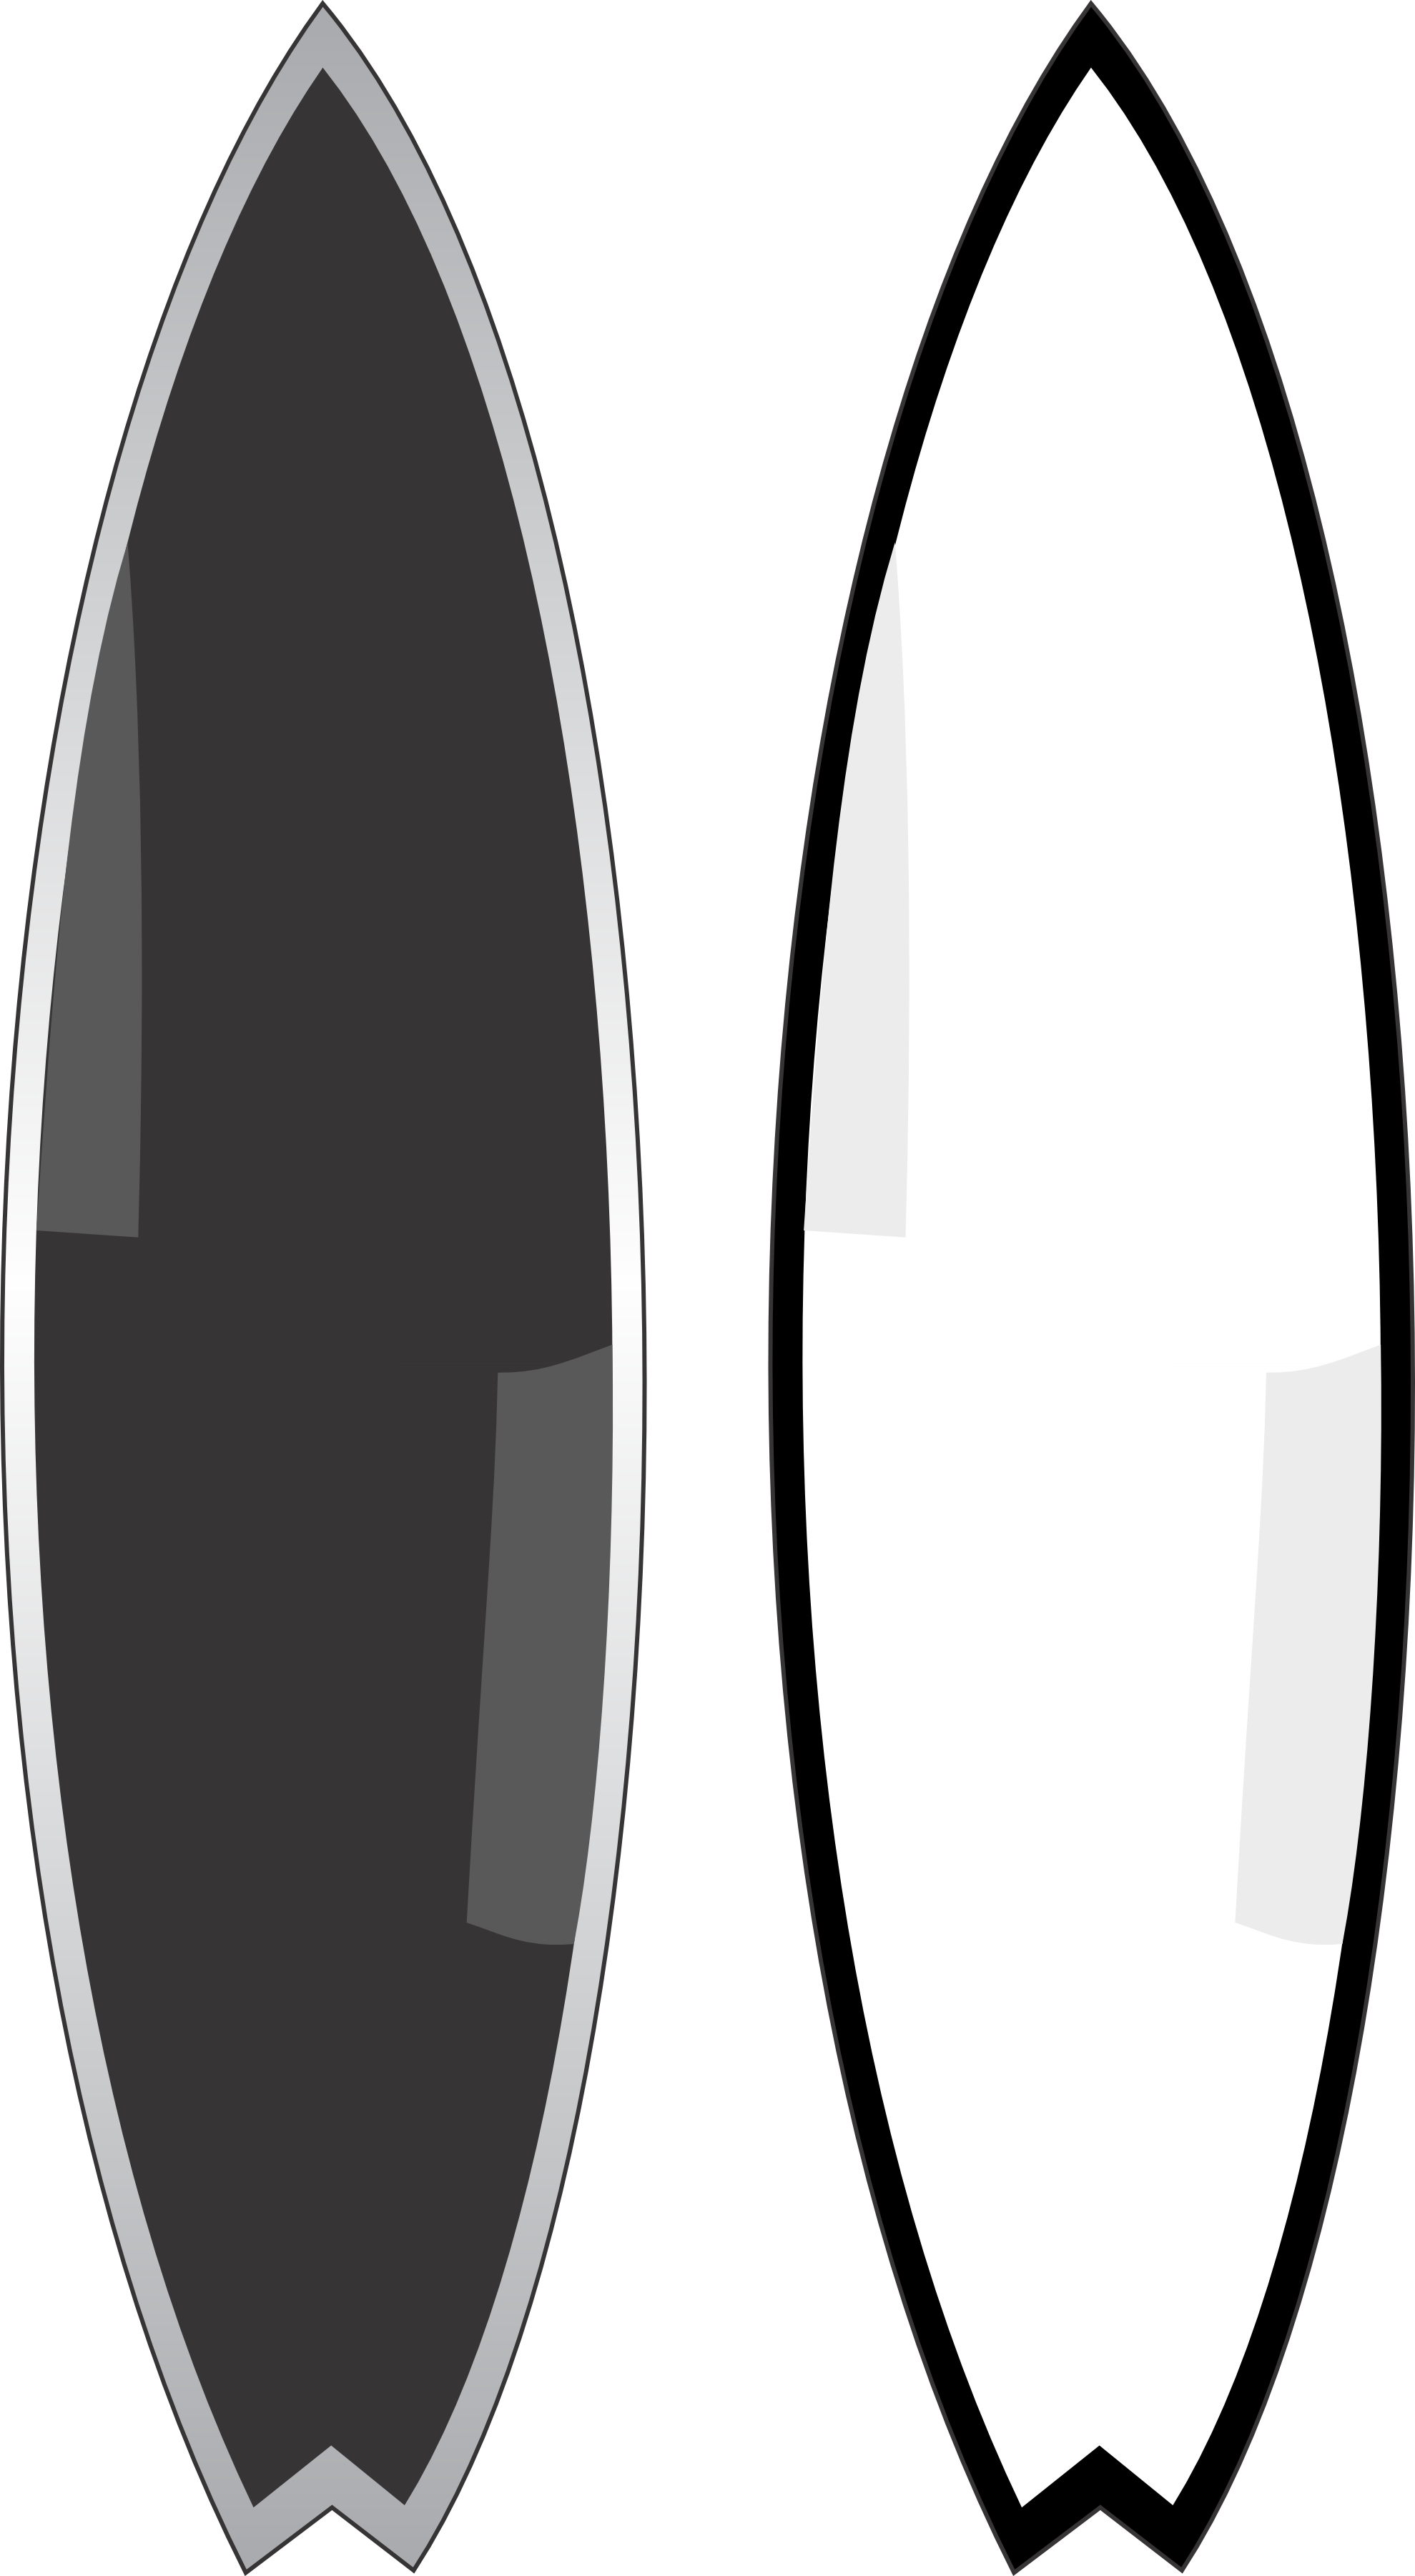 Vehicles For > Cartoon Surfboard Black And White